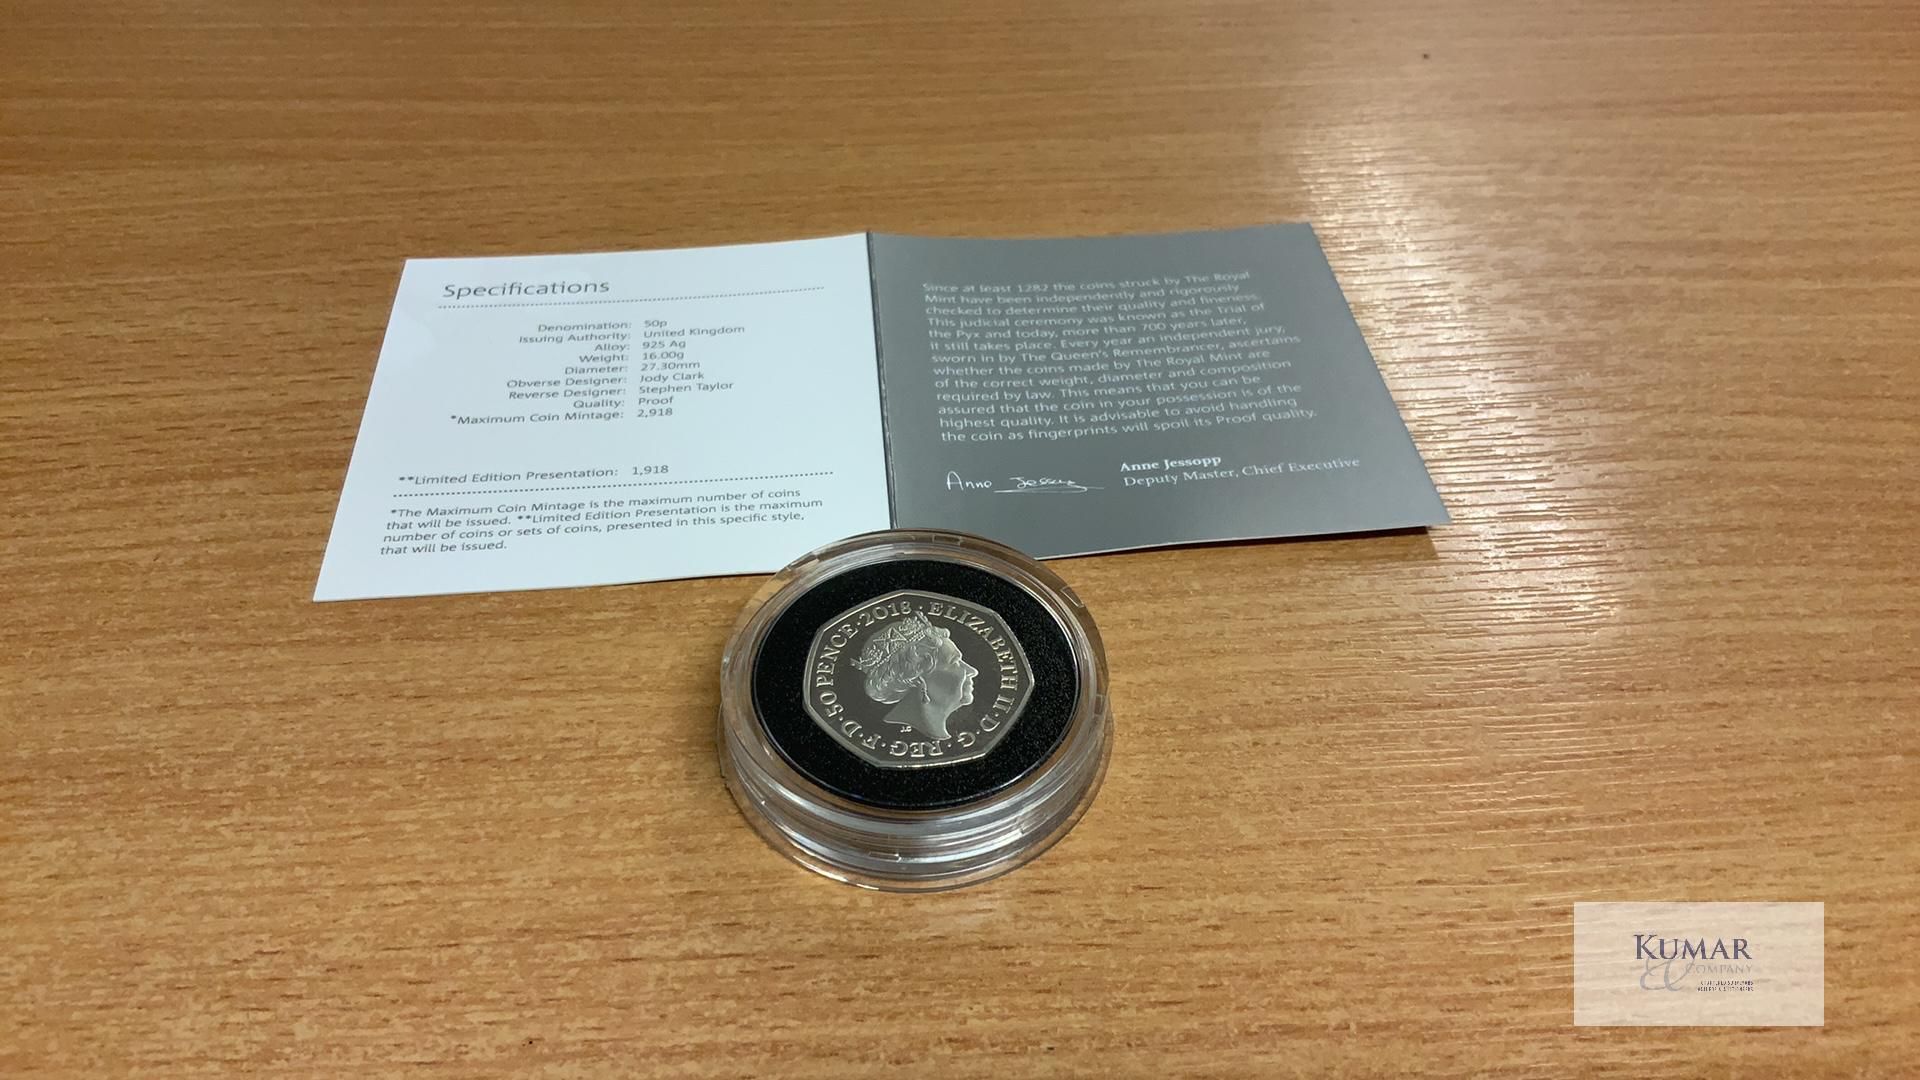 The Royal Mint Coin- An Act to Unite 1918 Representation of the People Act 2018 2018 UK 50p Silver - Image 4 of 4